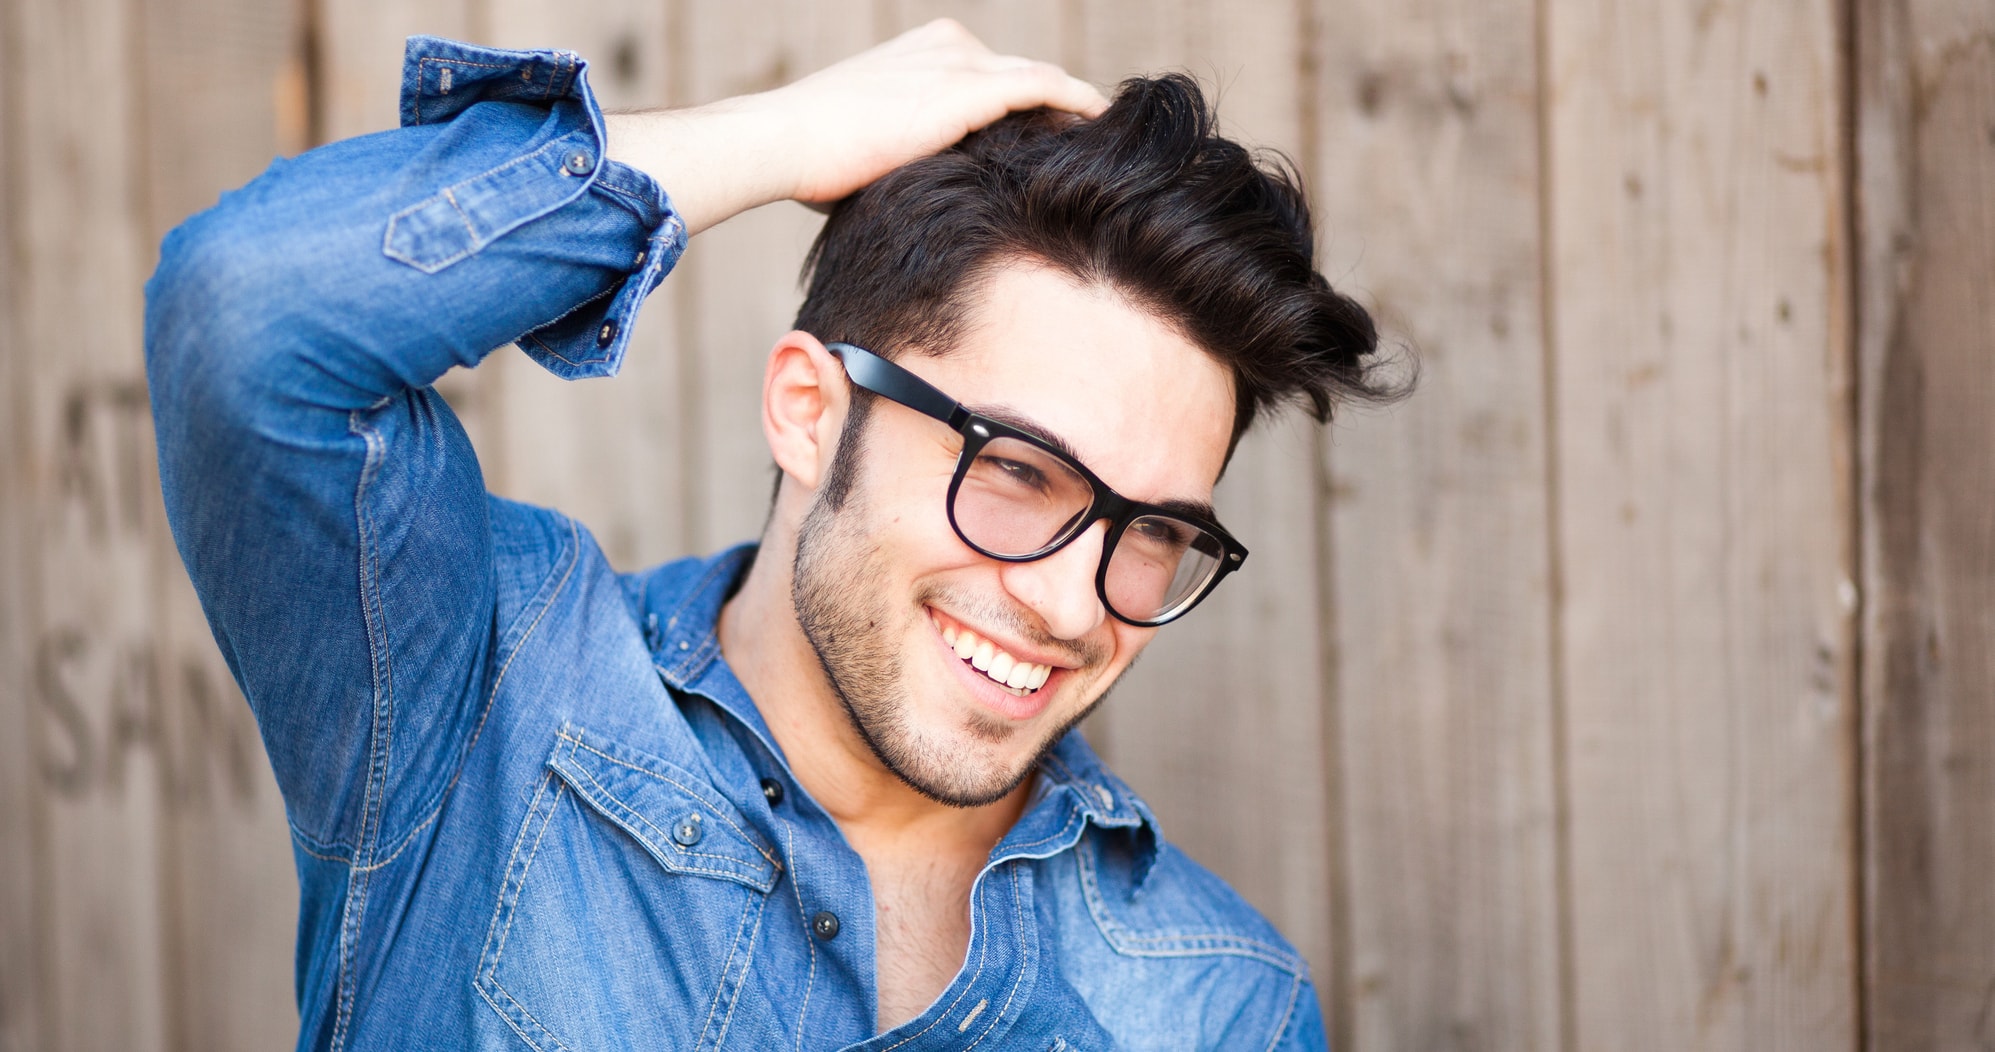 Discover Everything You Need to Know about Hair Restoration...Right Here!